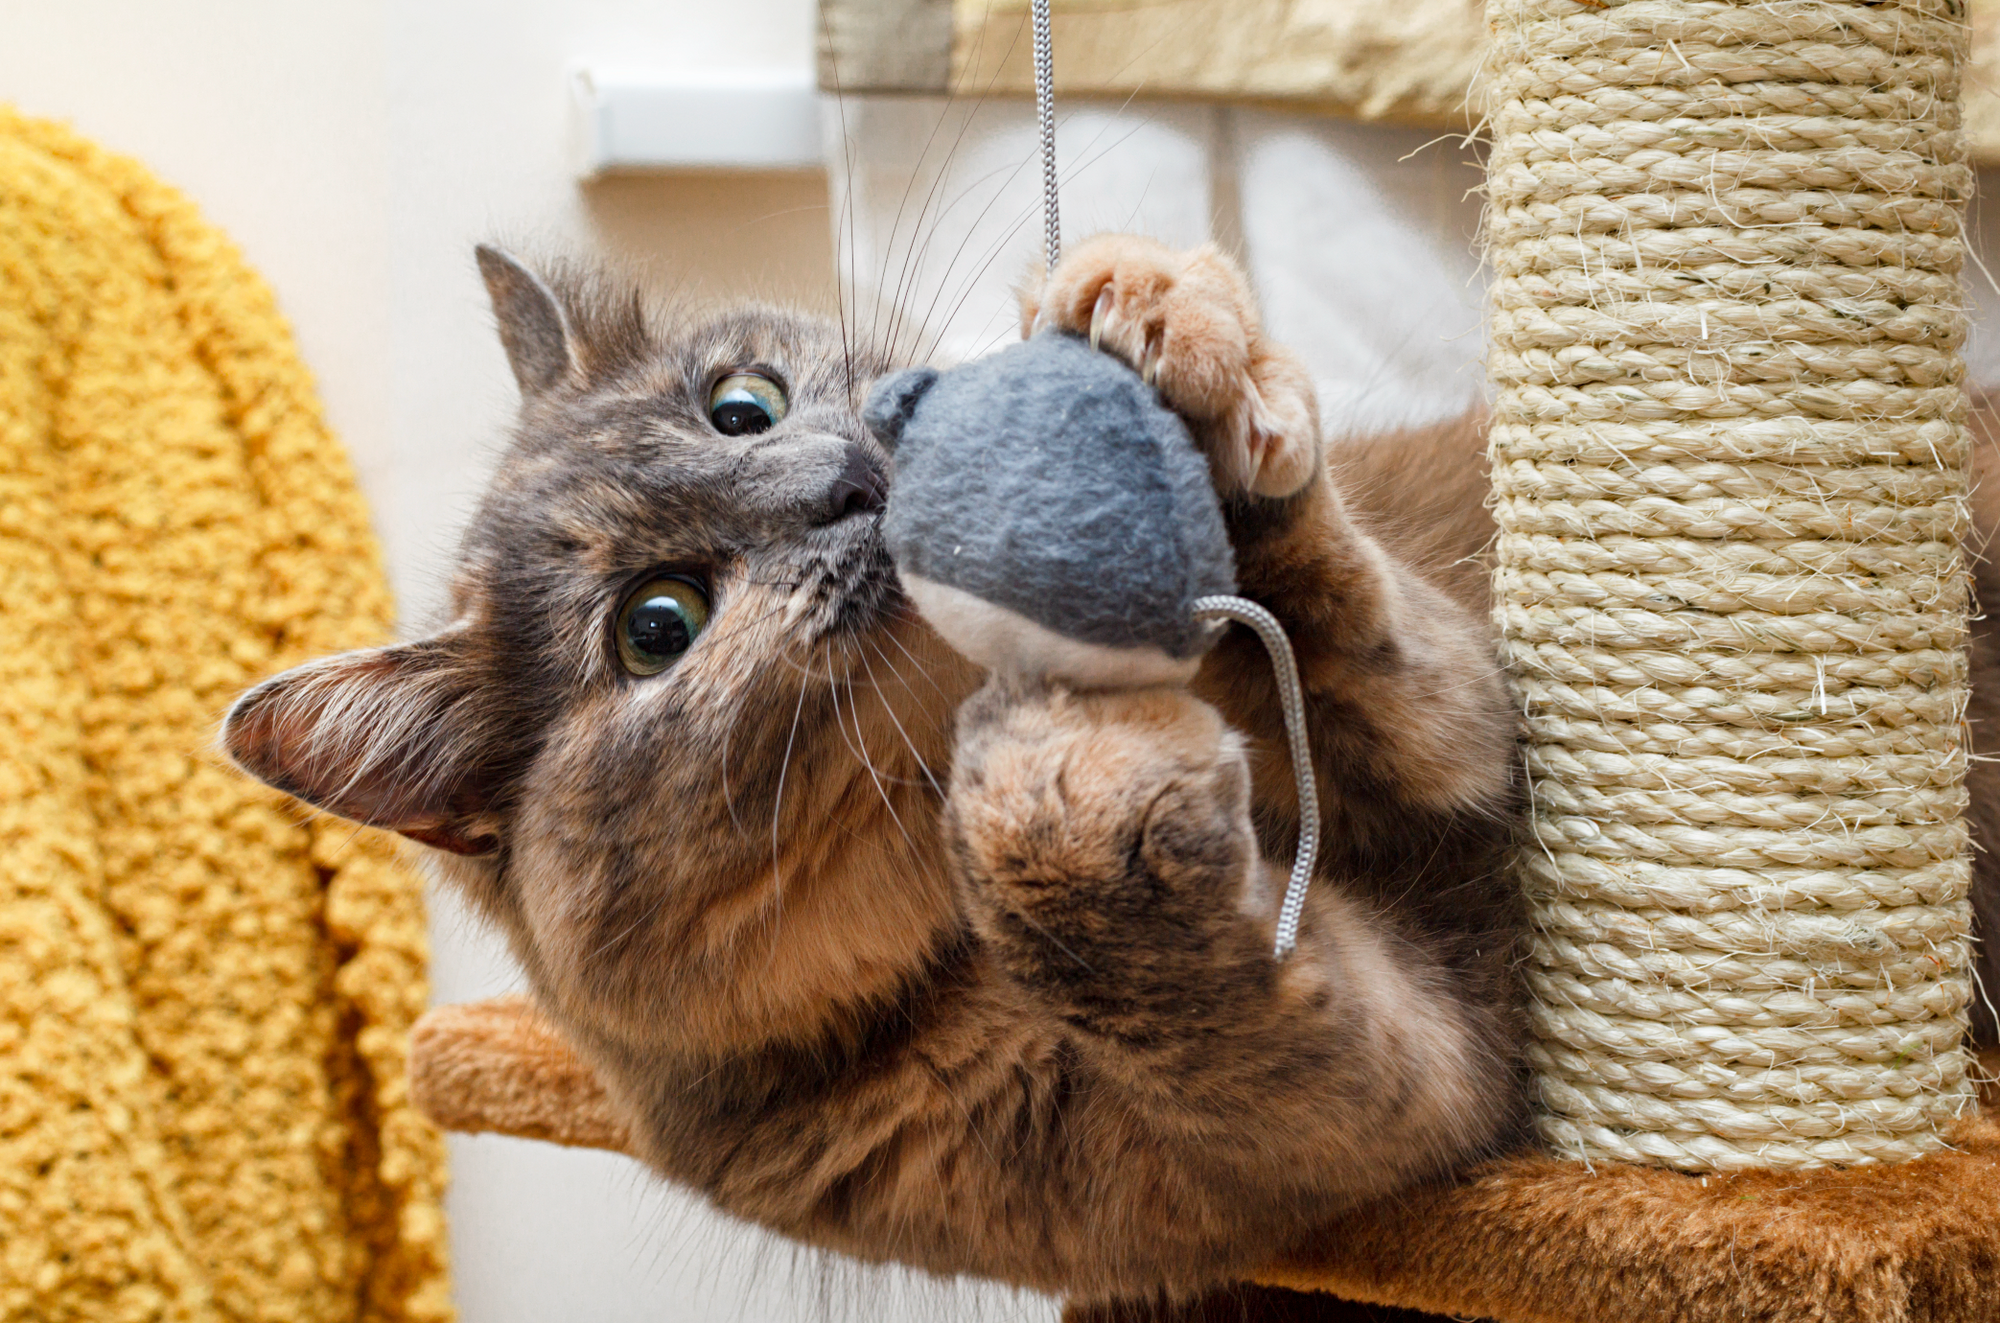 A cat happily playing with a toy indoors.